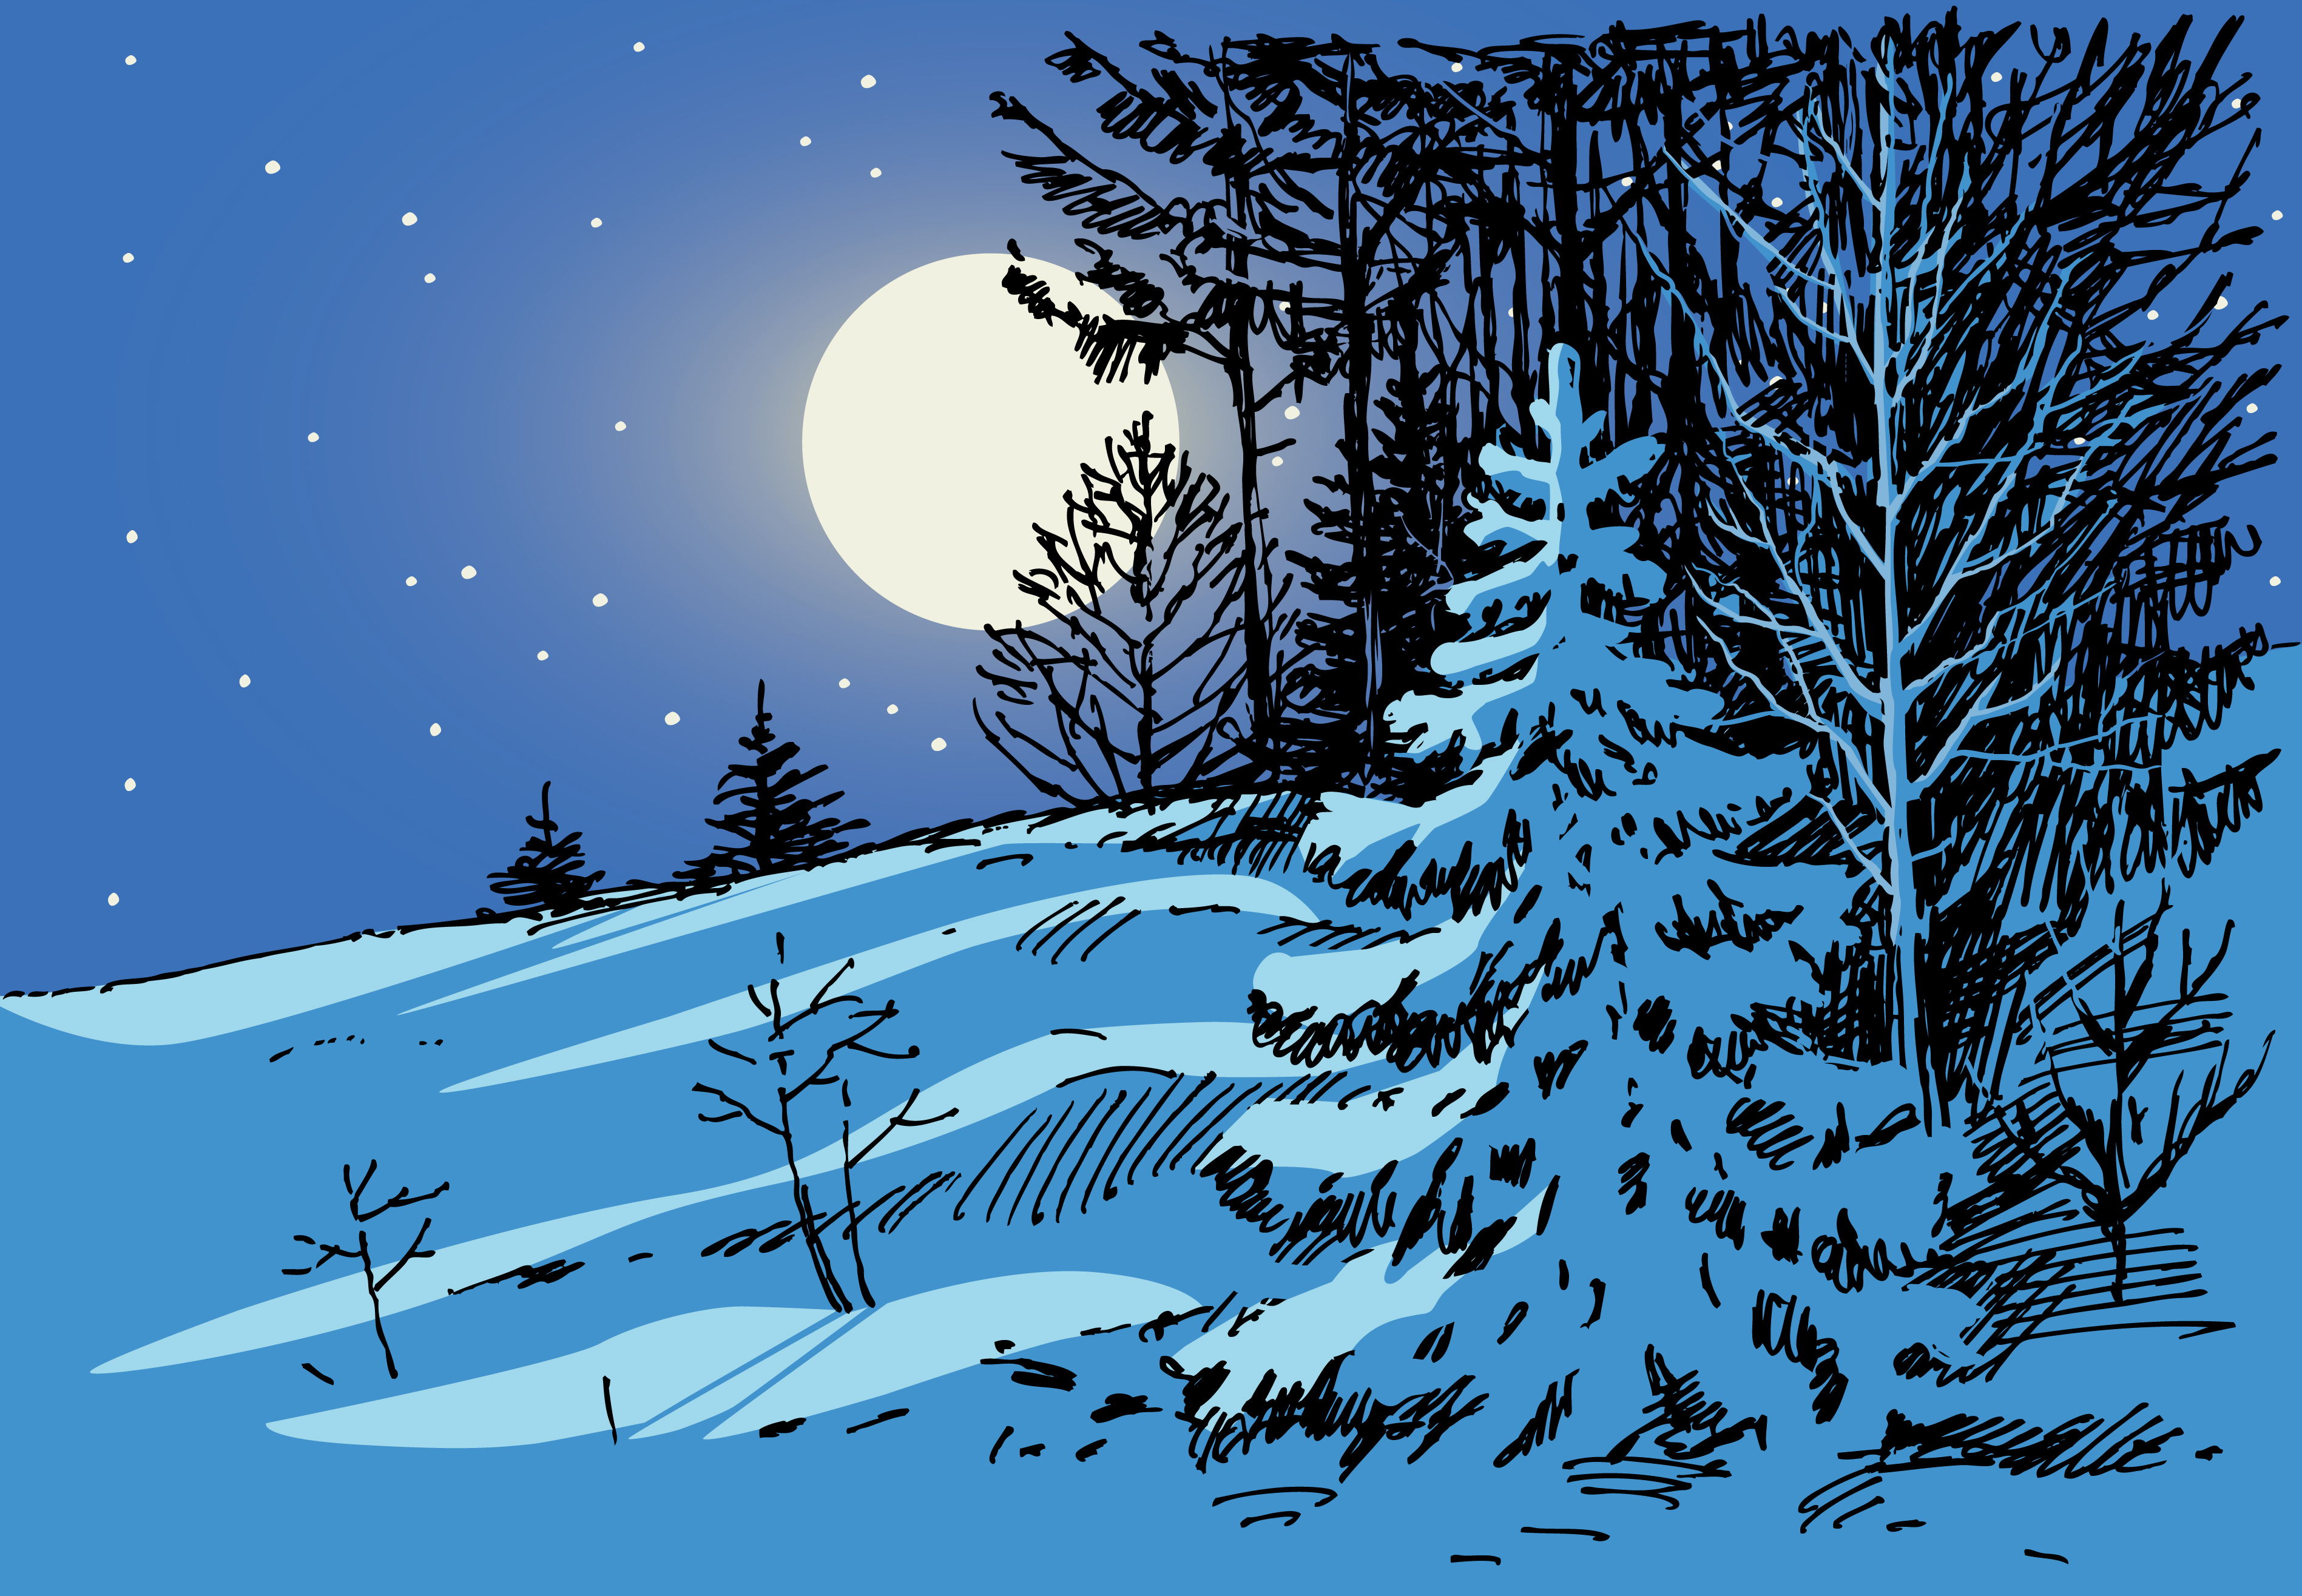 Amazing Silent Night Pictures & Backgrounds